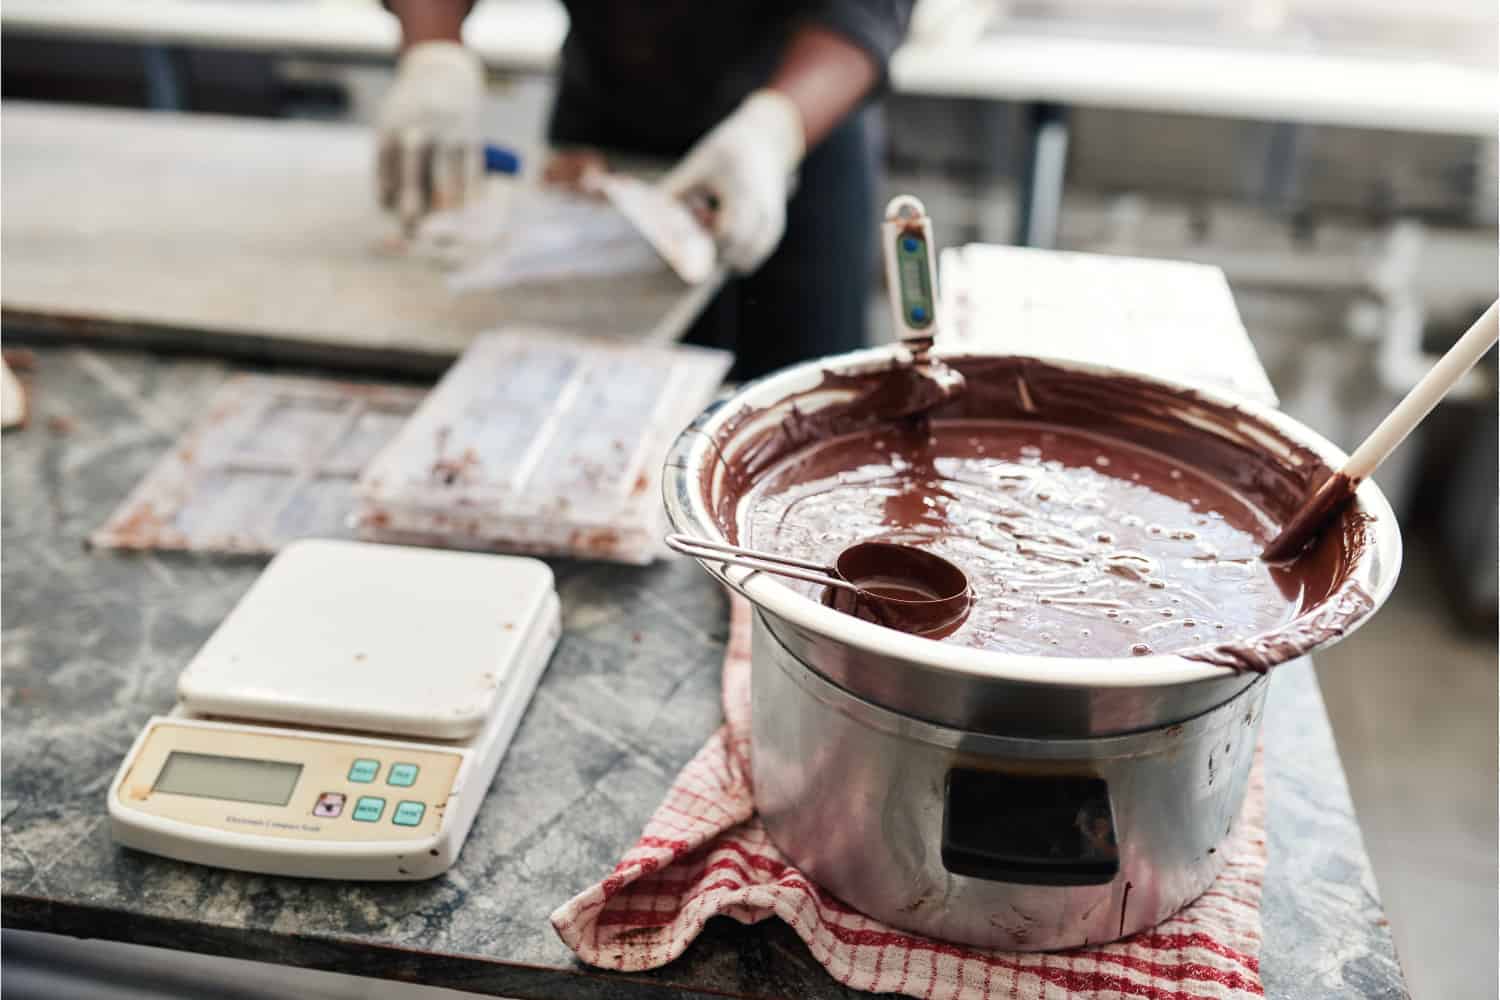 Melted chocolate in a bain marie on a table in an artisanal chocolate making factory being mixed and temperature monitored